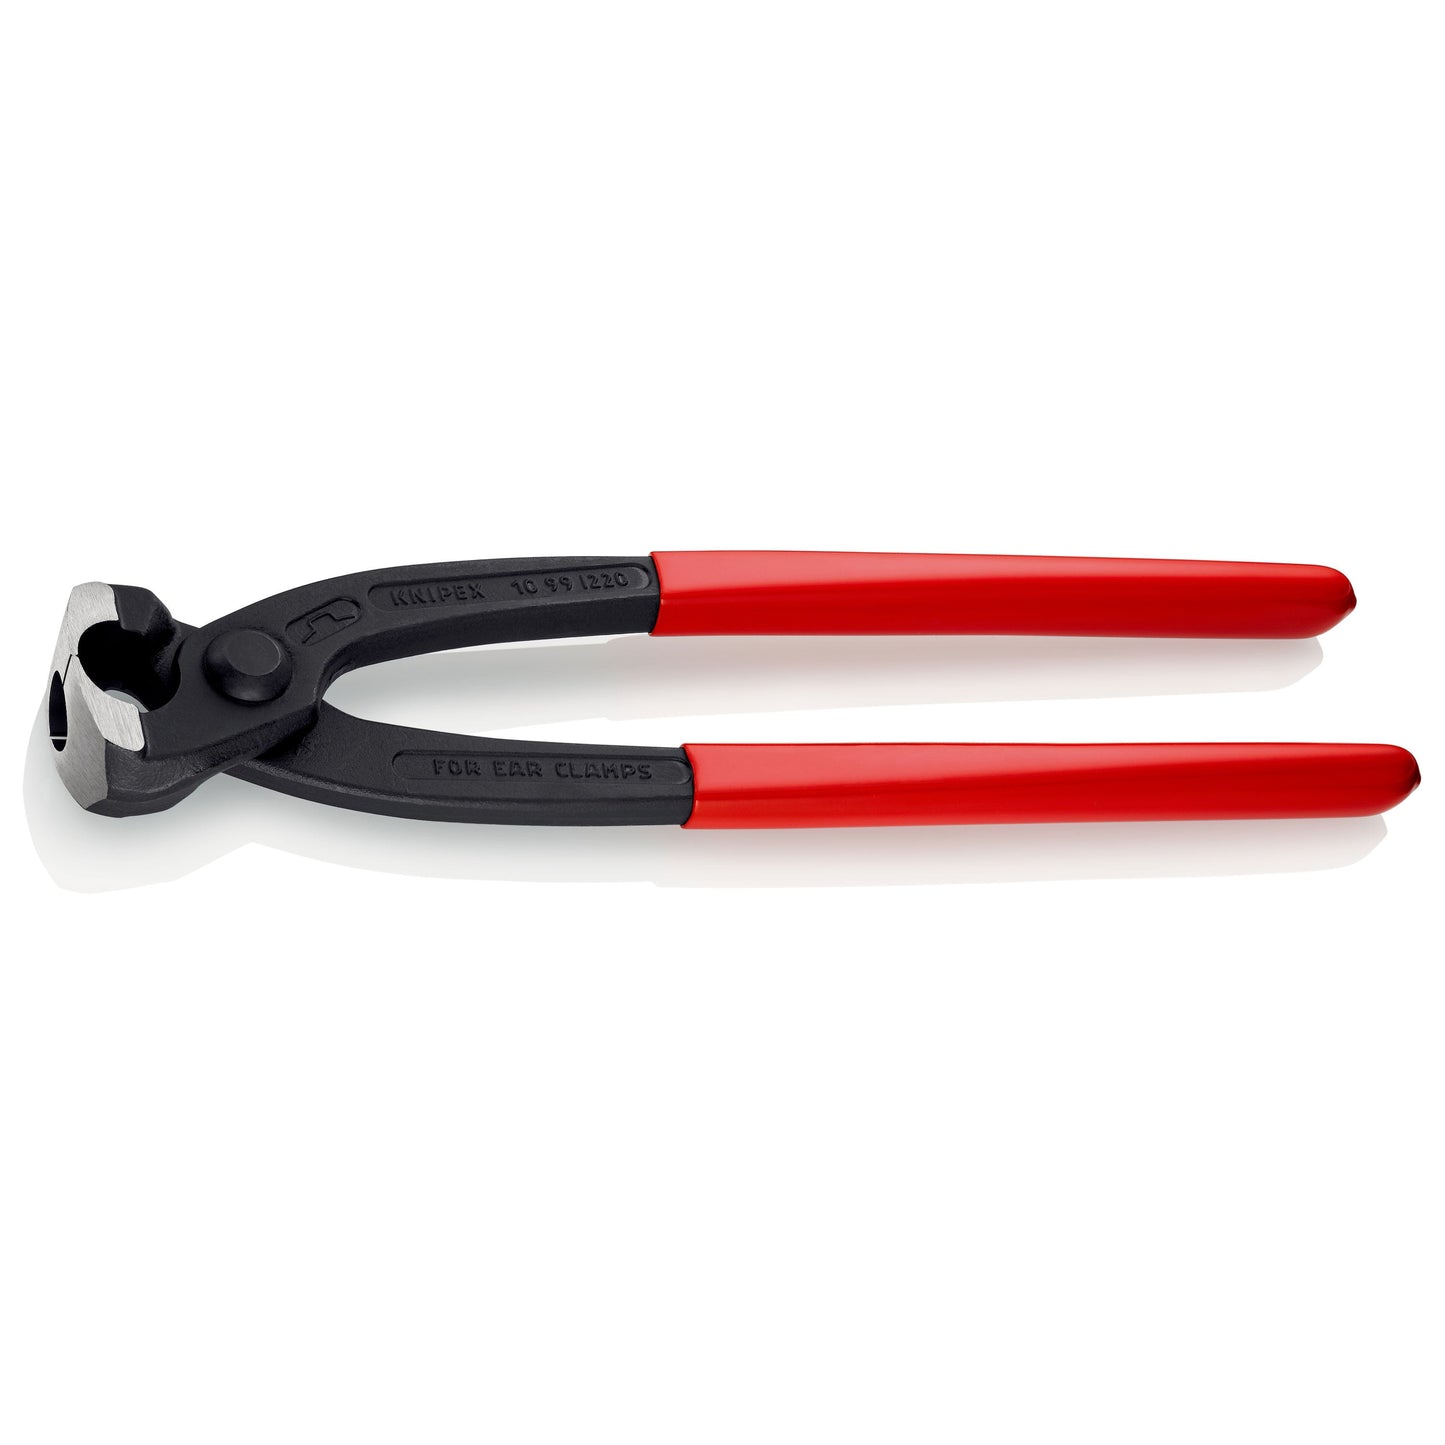 Knipex 10 99 I220 - Pliers for Knipex clamps 220 mm. with PVC handles